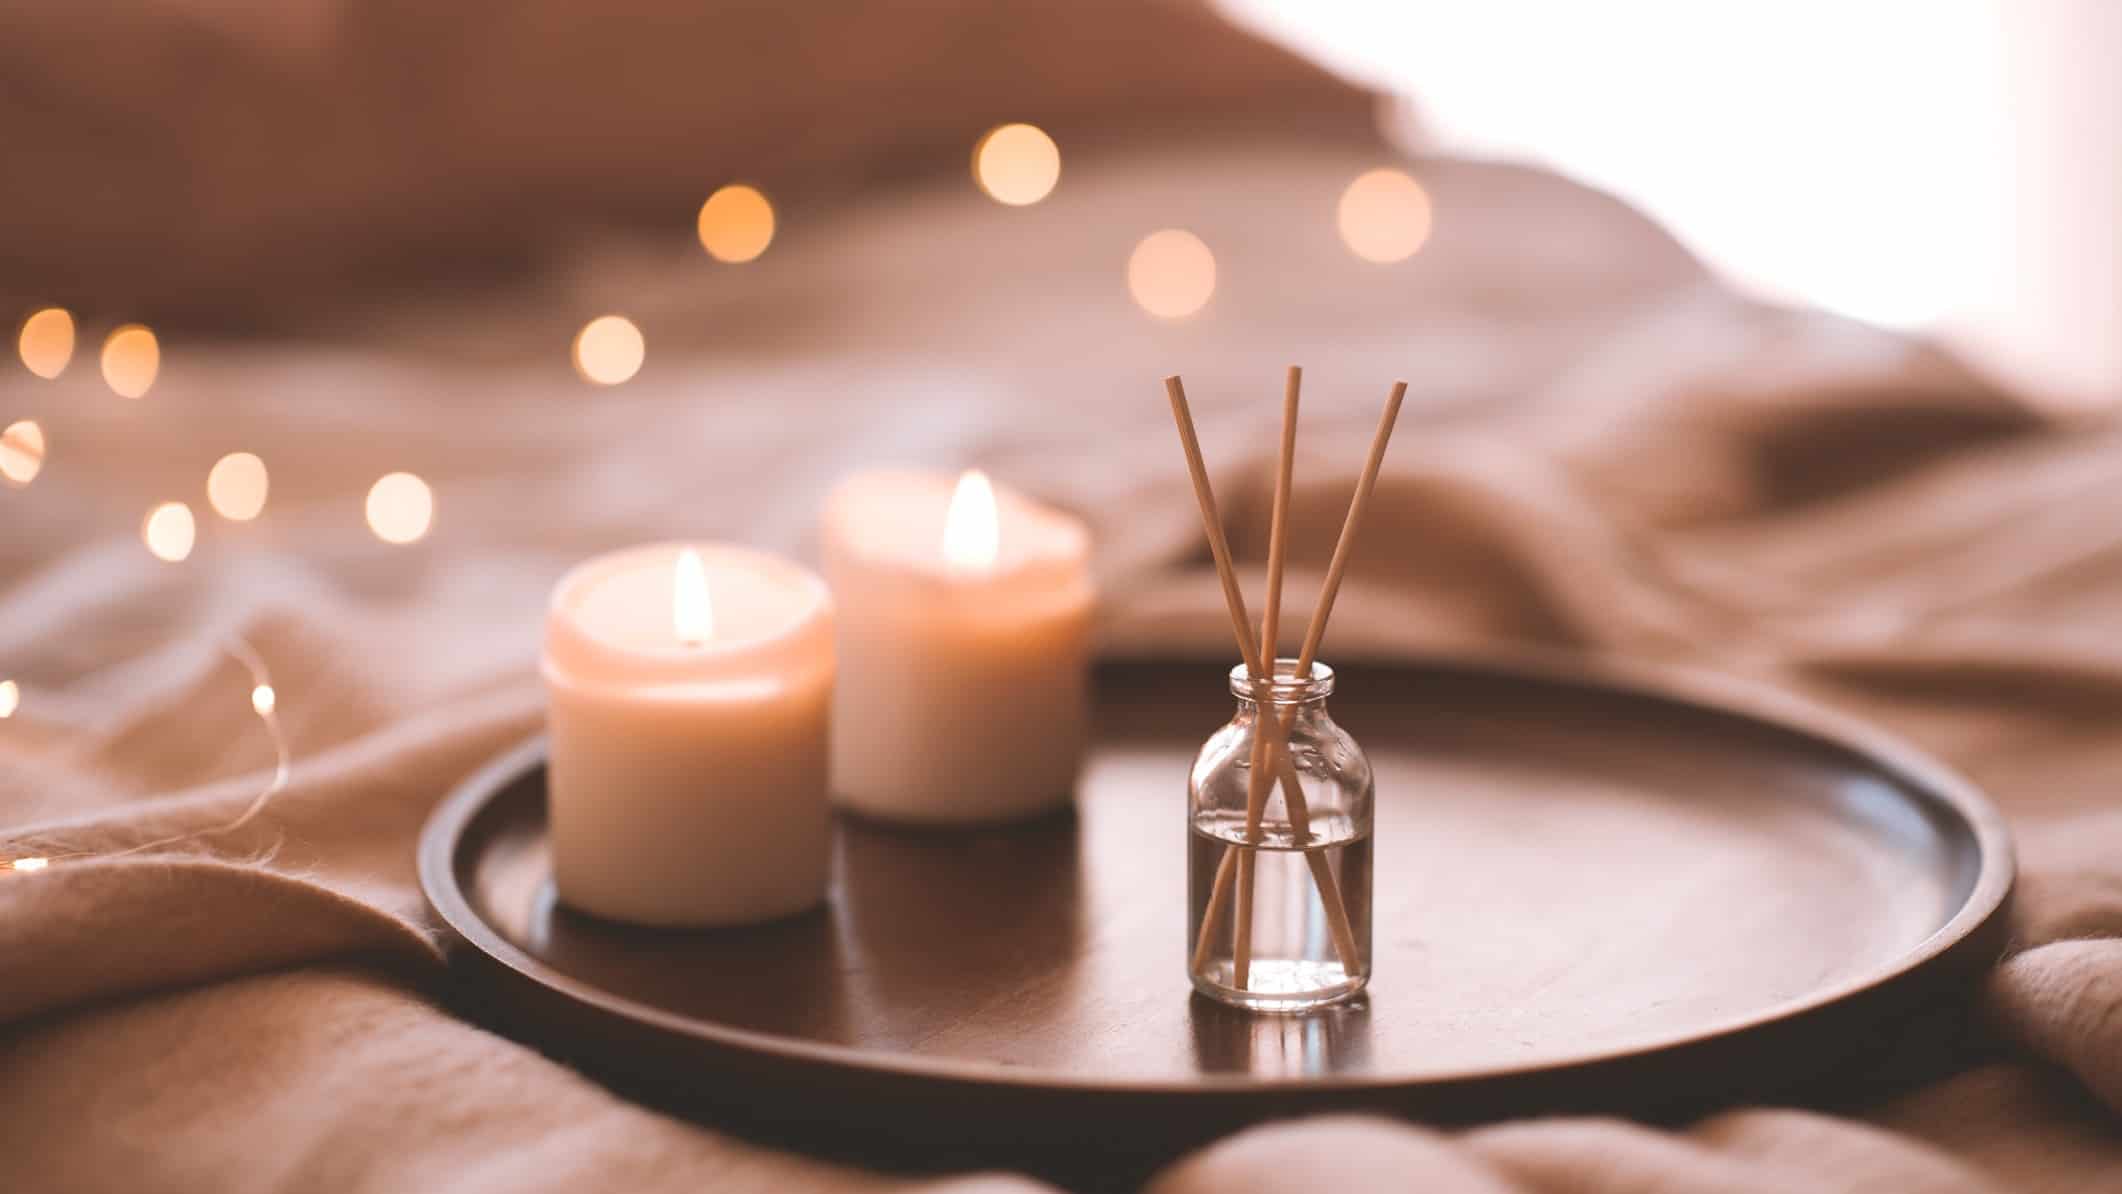 homewares asx share price represented by candles and reed diffuser on tray